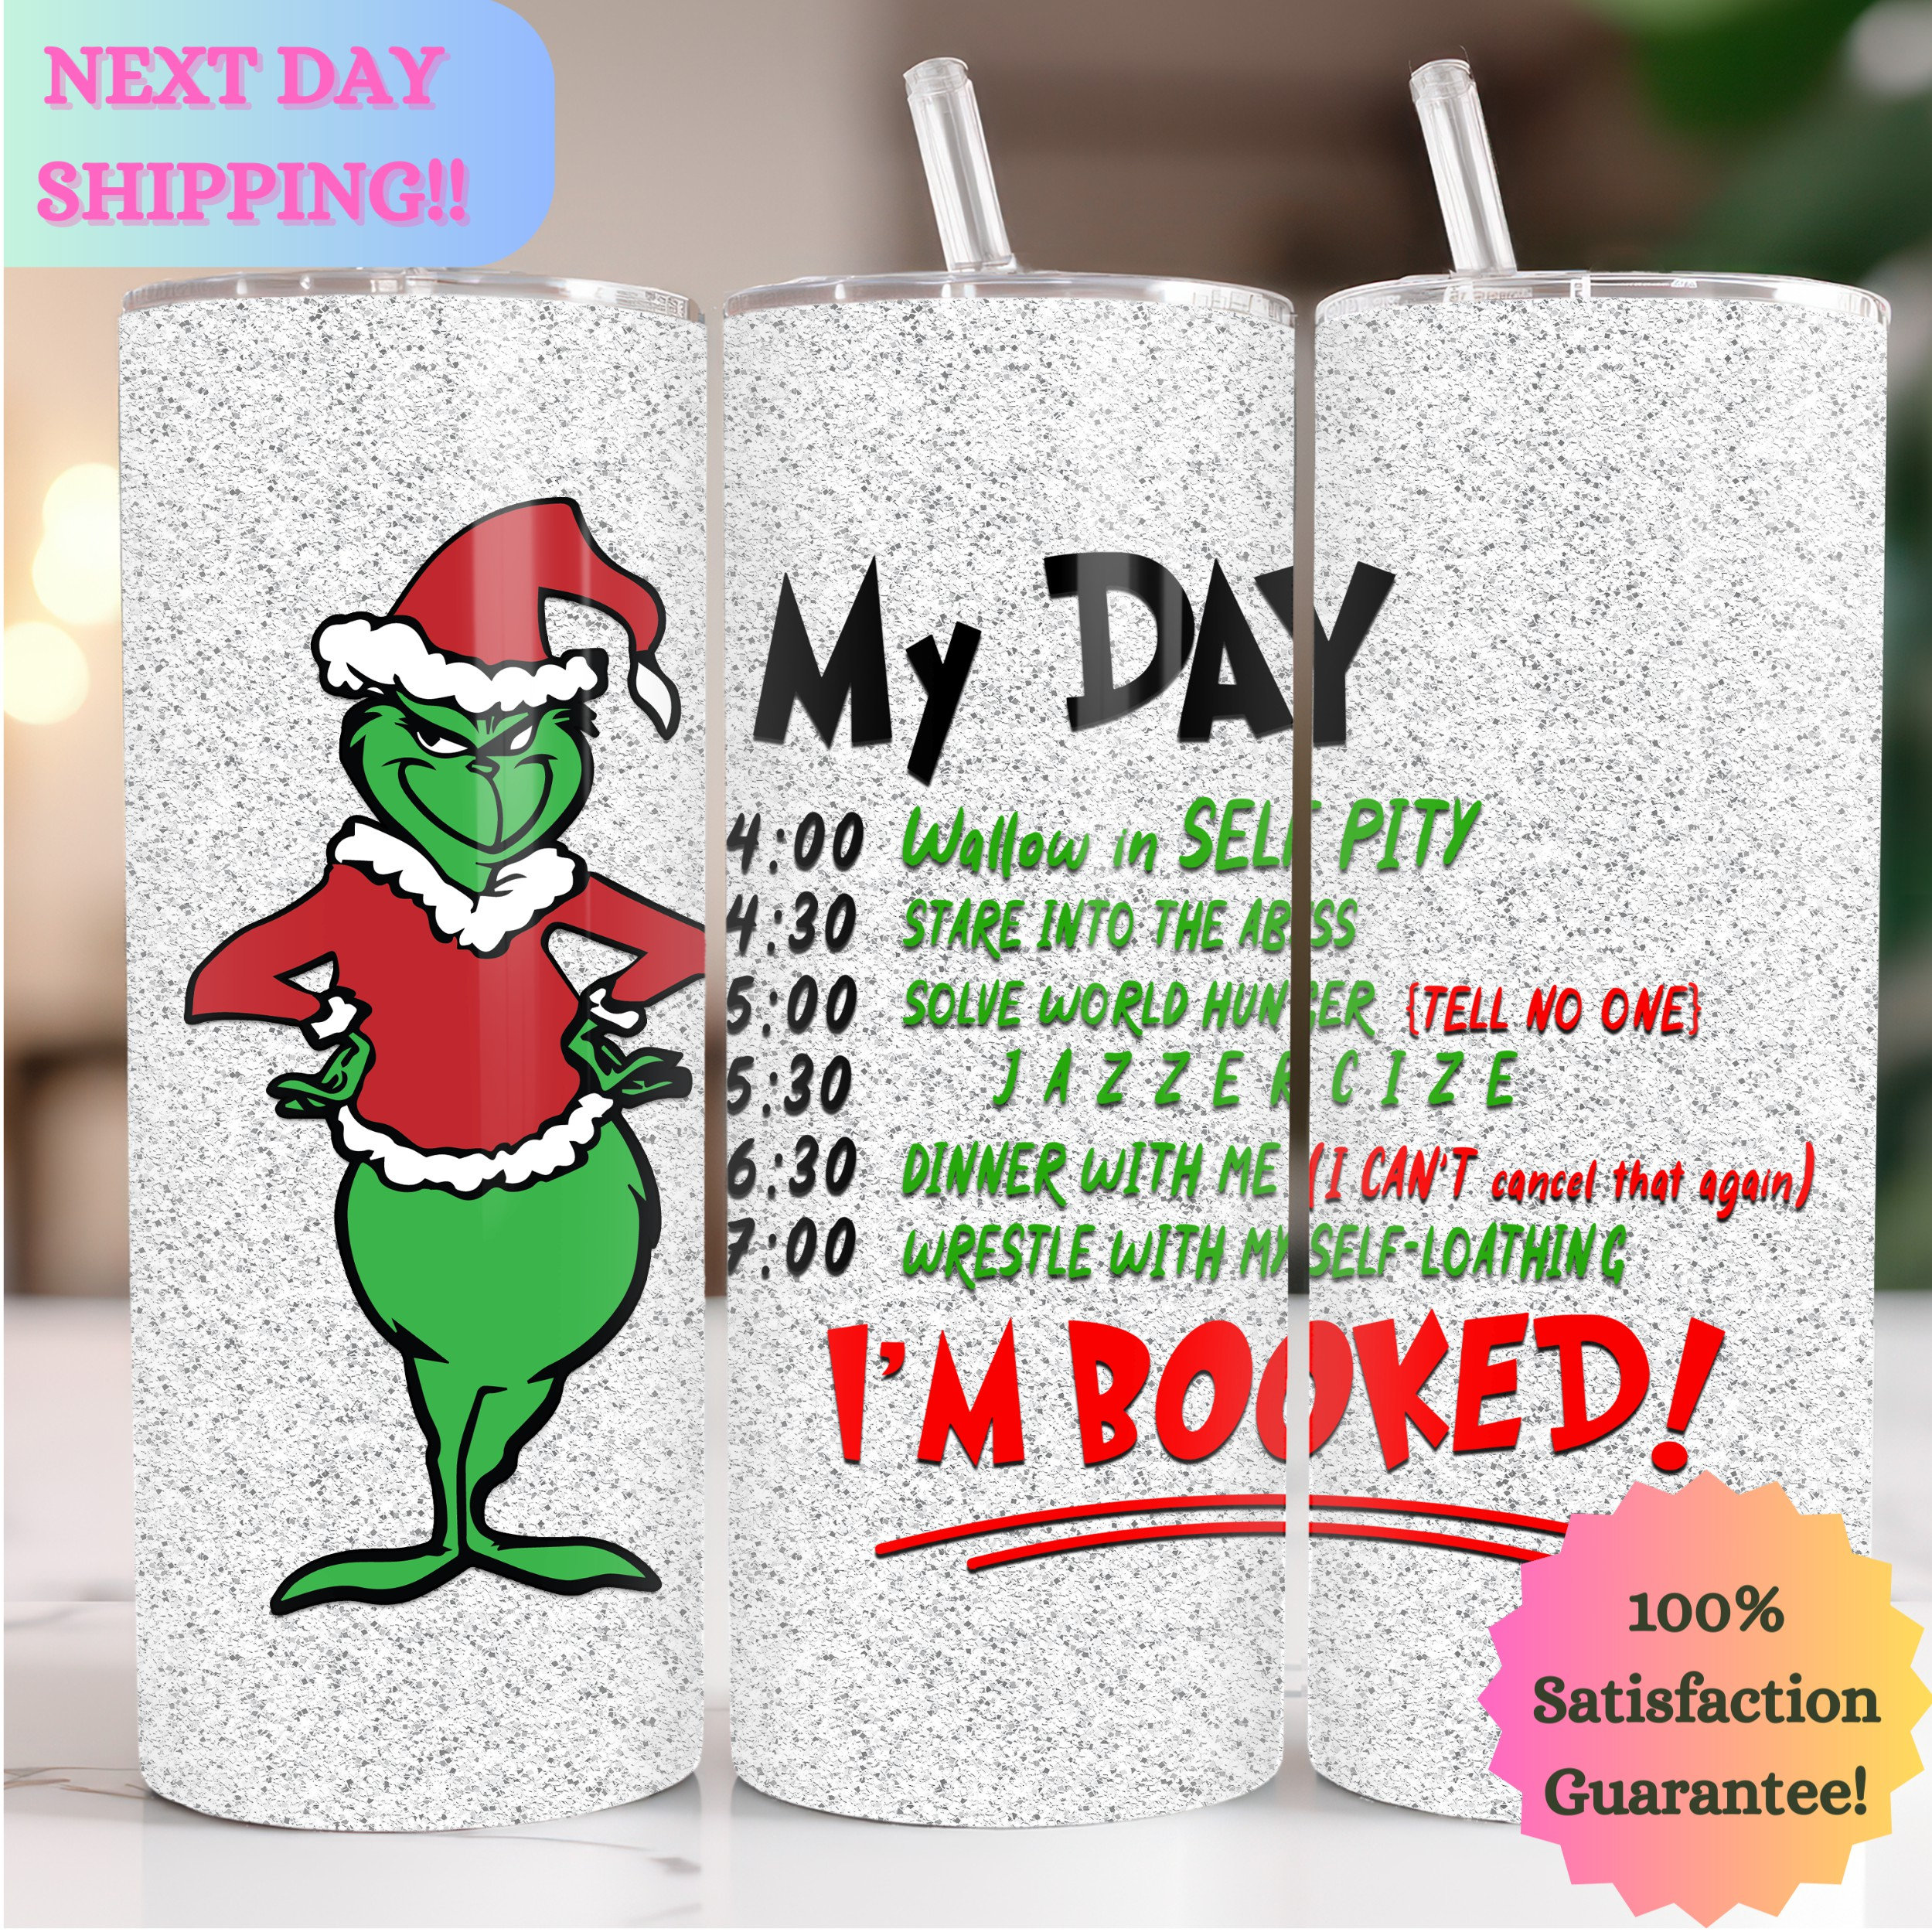 Christmas Green Grinch Straw Topper – Etch and Ember